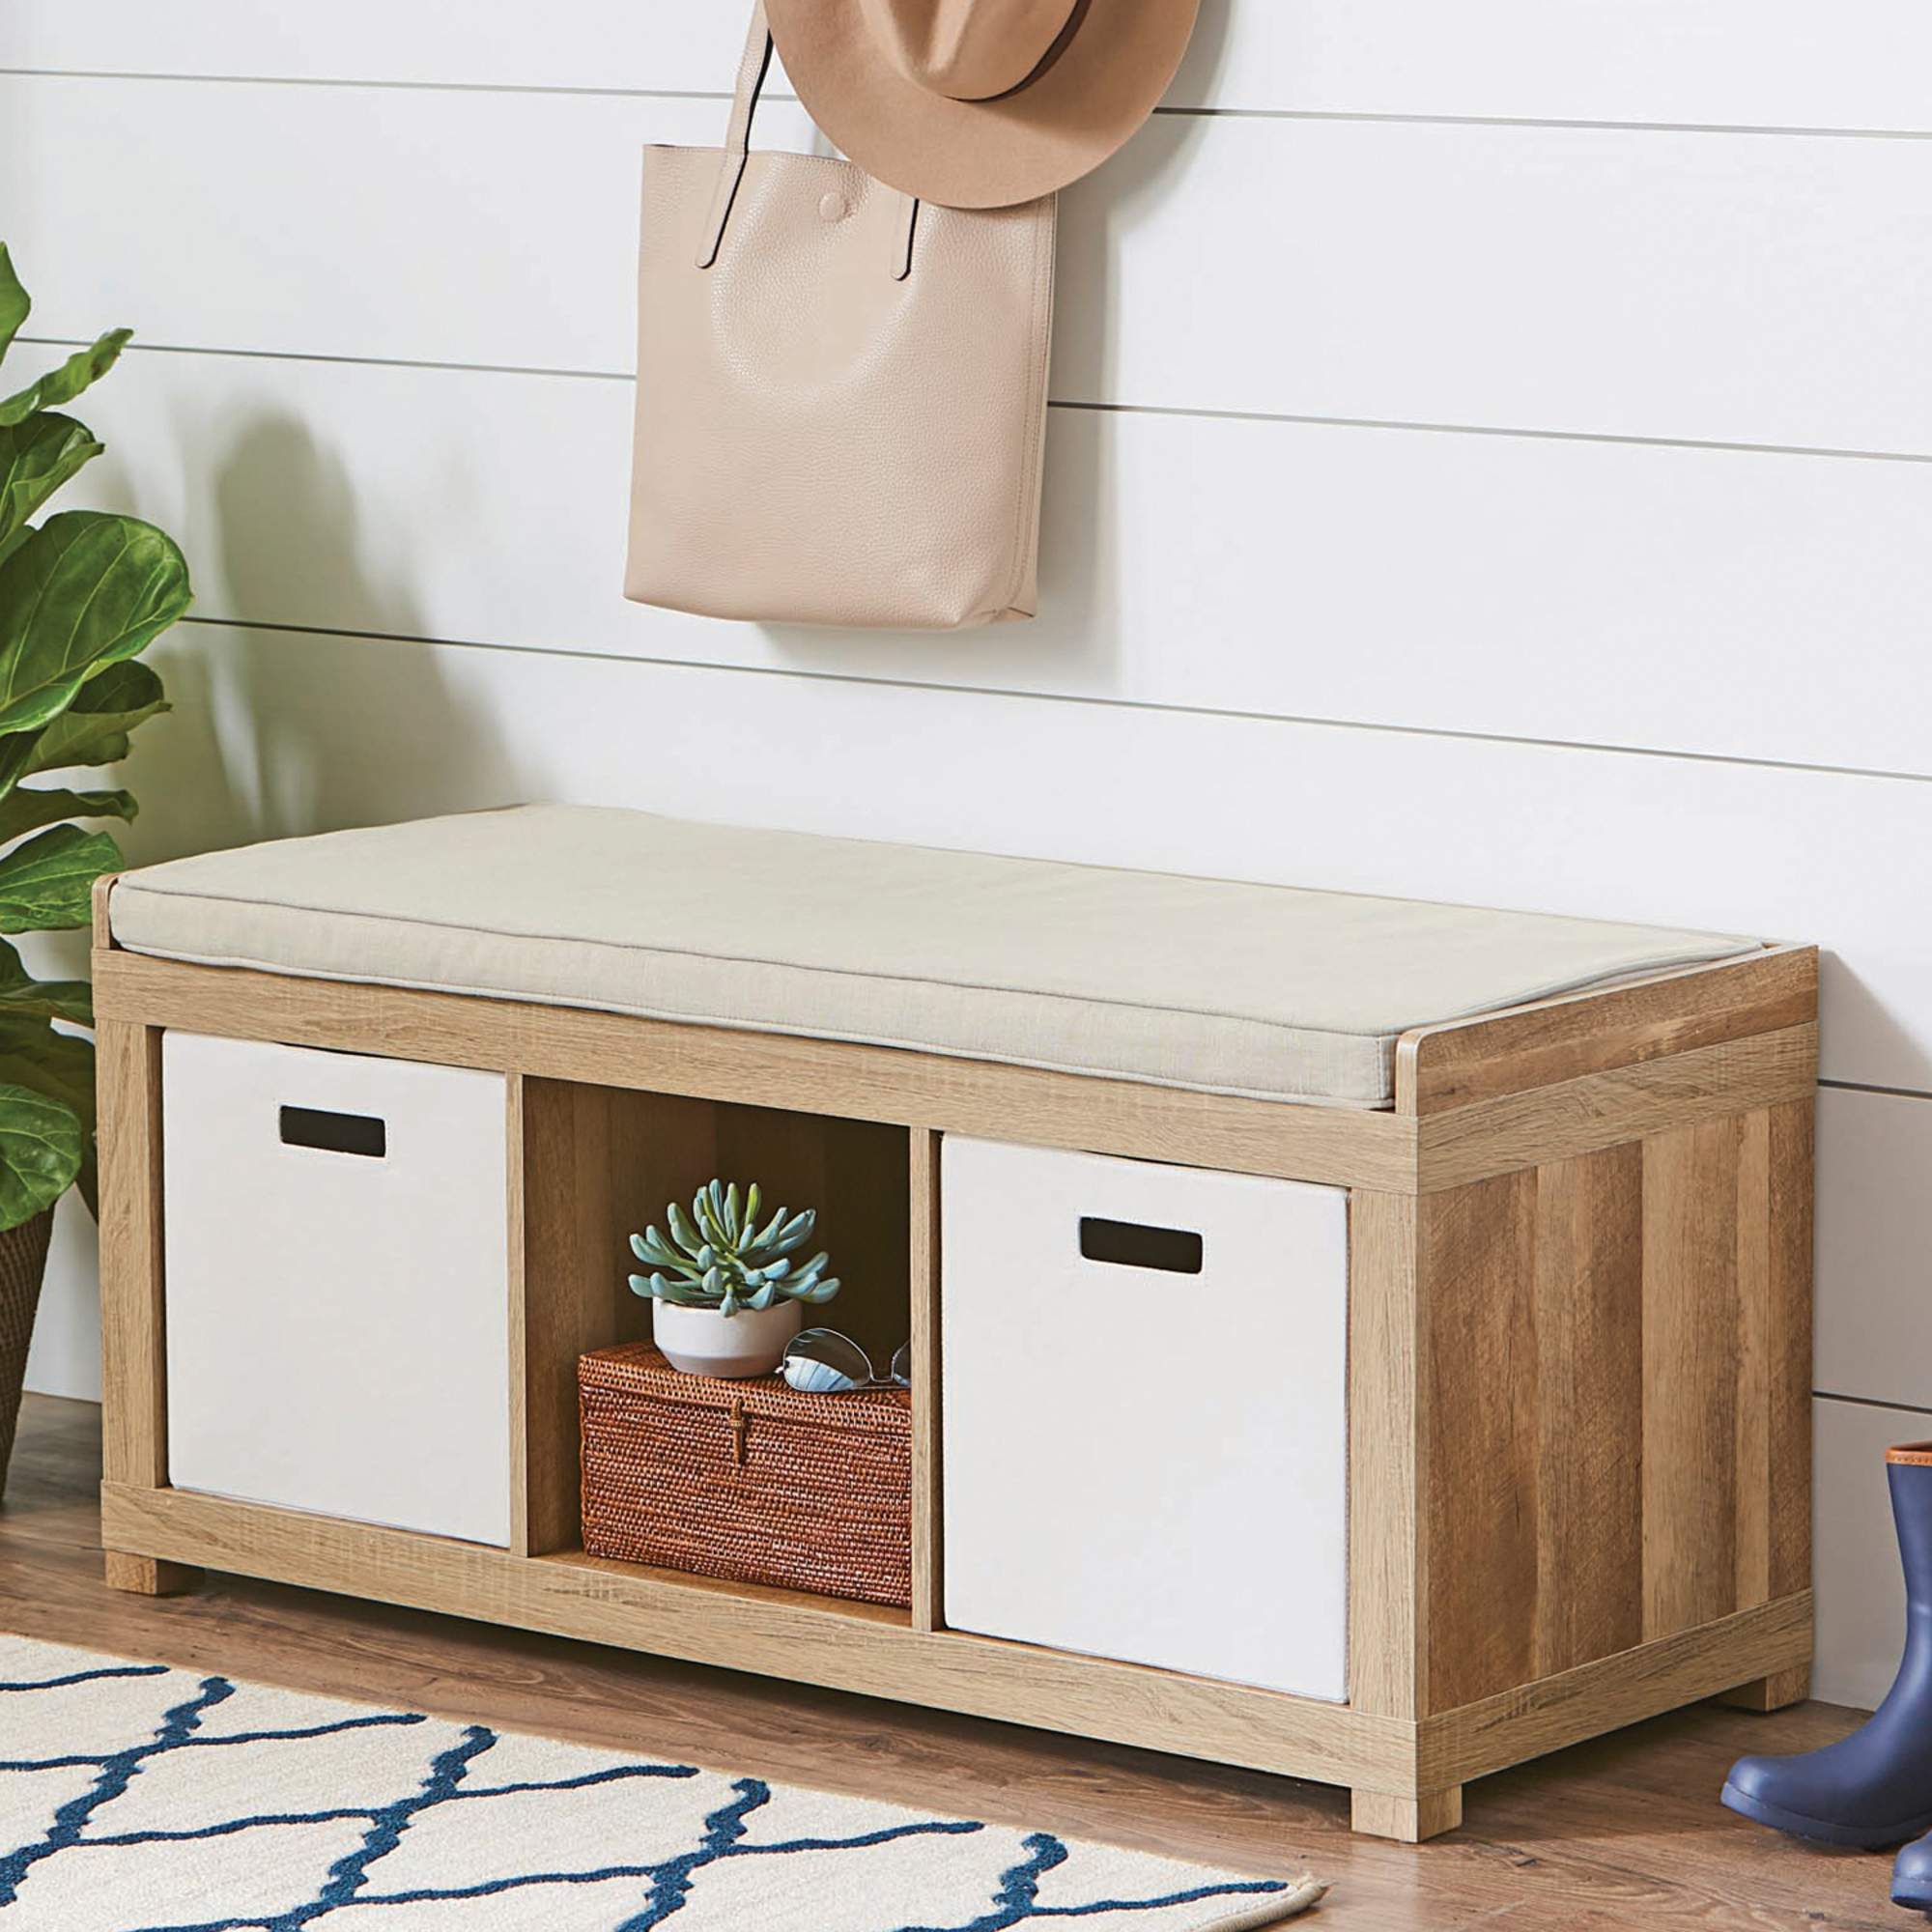 Better Homes & Gardens 3-Cube Shoe Storage Bench, Weathered - image 1 of 9